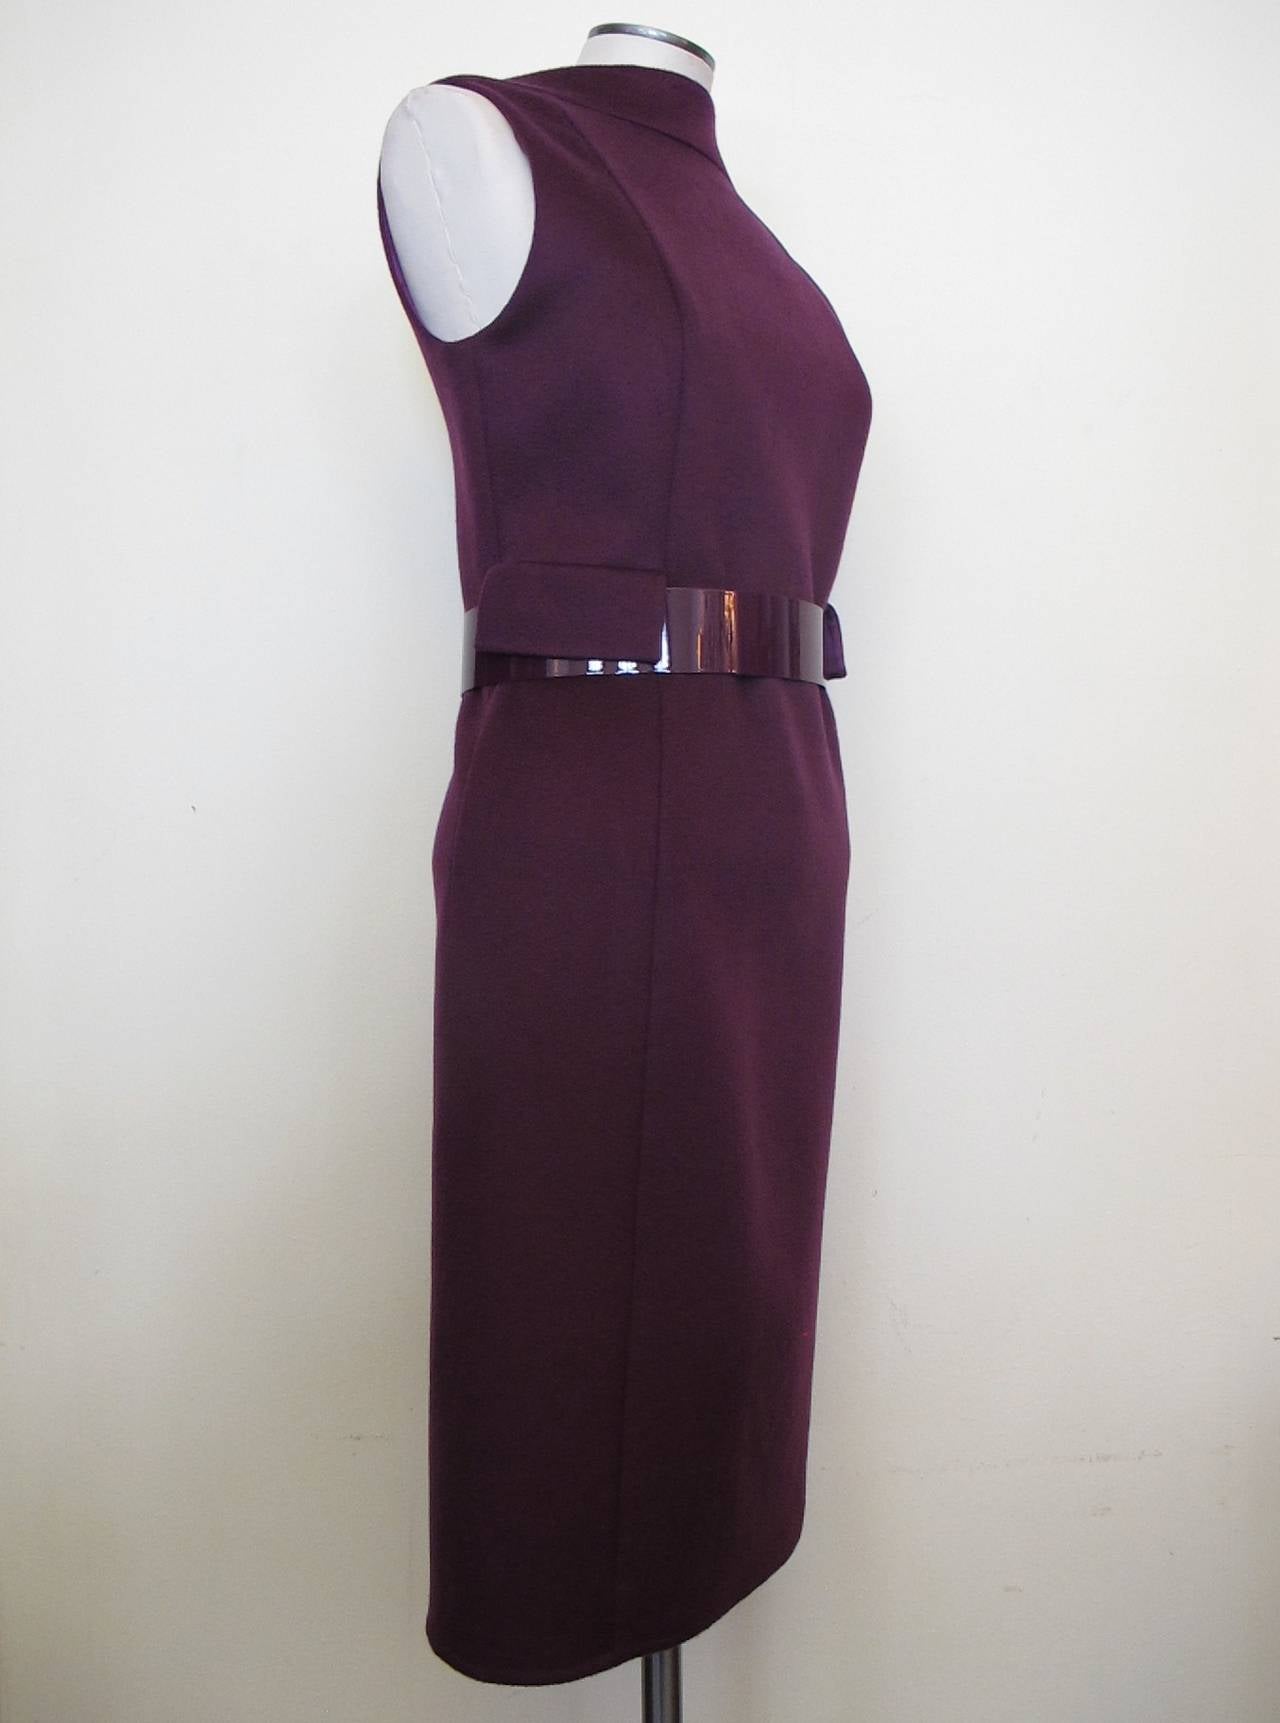 Exquisite plum cashmere dress created by the Swiss master, Albert Kriemler. The quality of the workmanship, fabrics and 100% silk lining is magnificent. The metal belt with the sued elasticized attachment creates a one of a kind look to the fashion